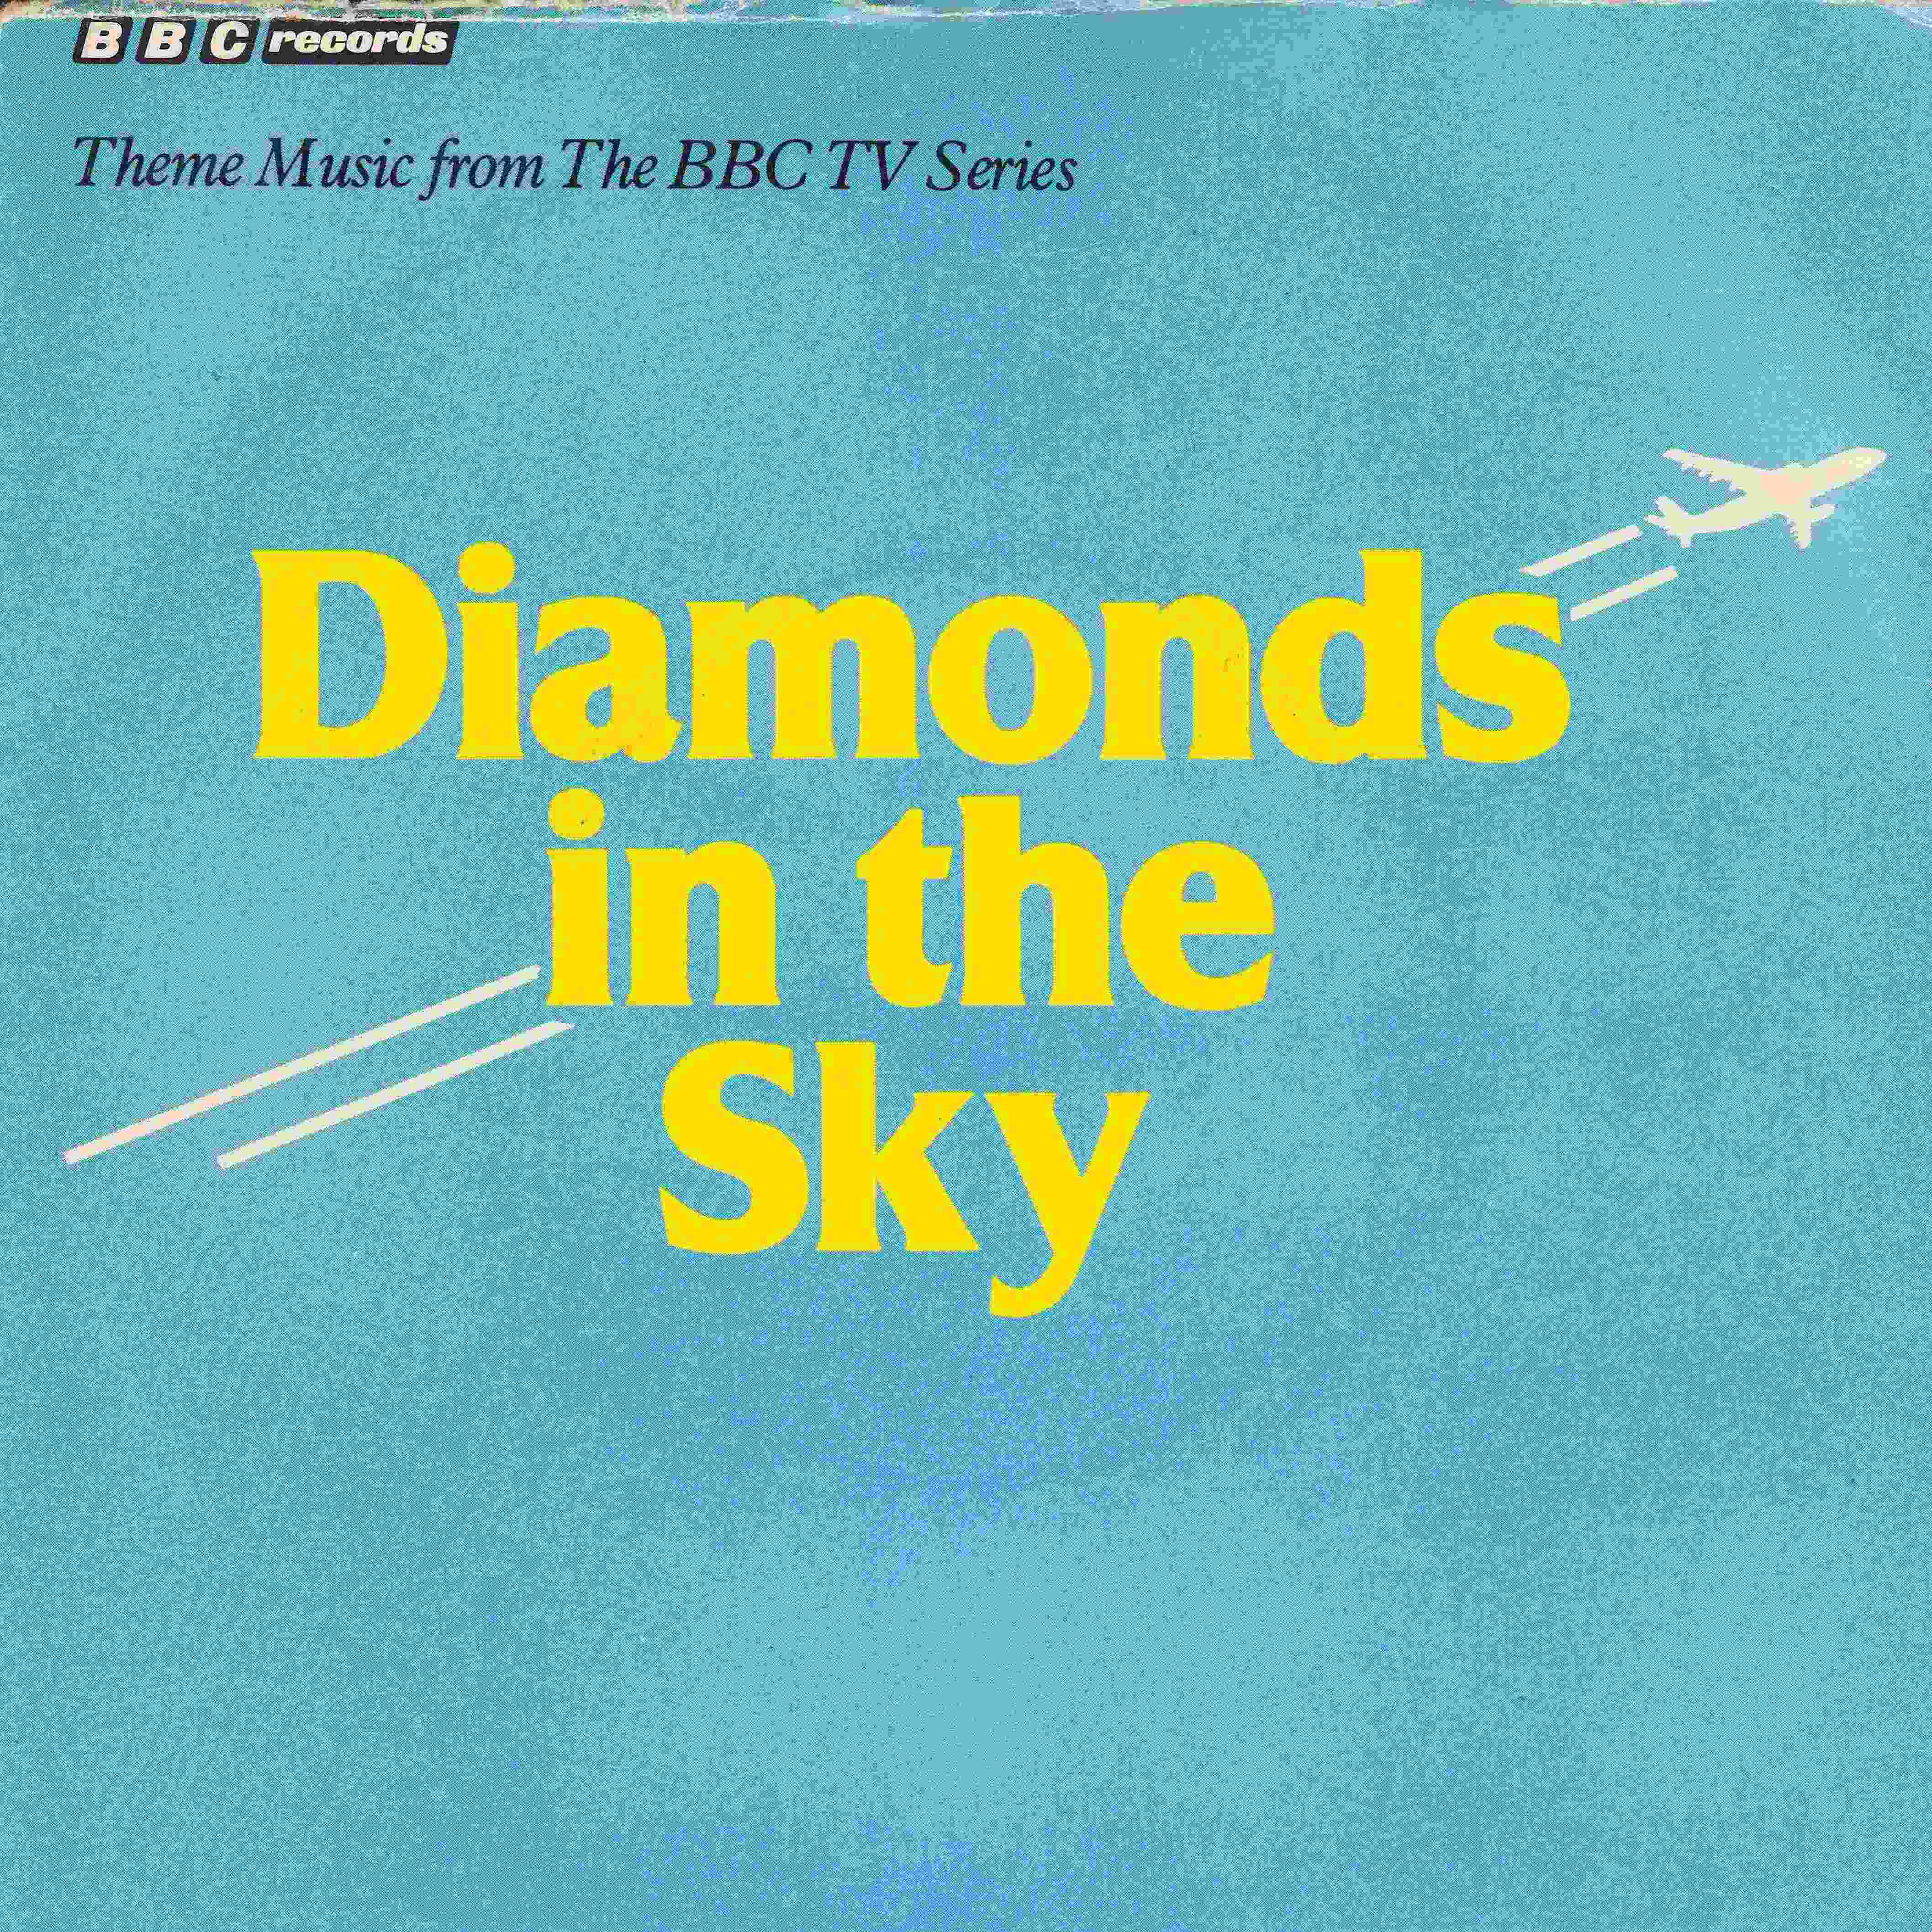 Picture of RESL 72 Diamonds in the sky by artist Richard Denton / Martin Cook from the BBC records and Tapes library